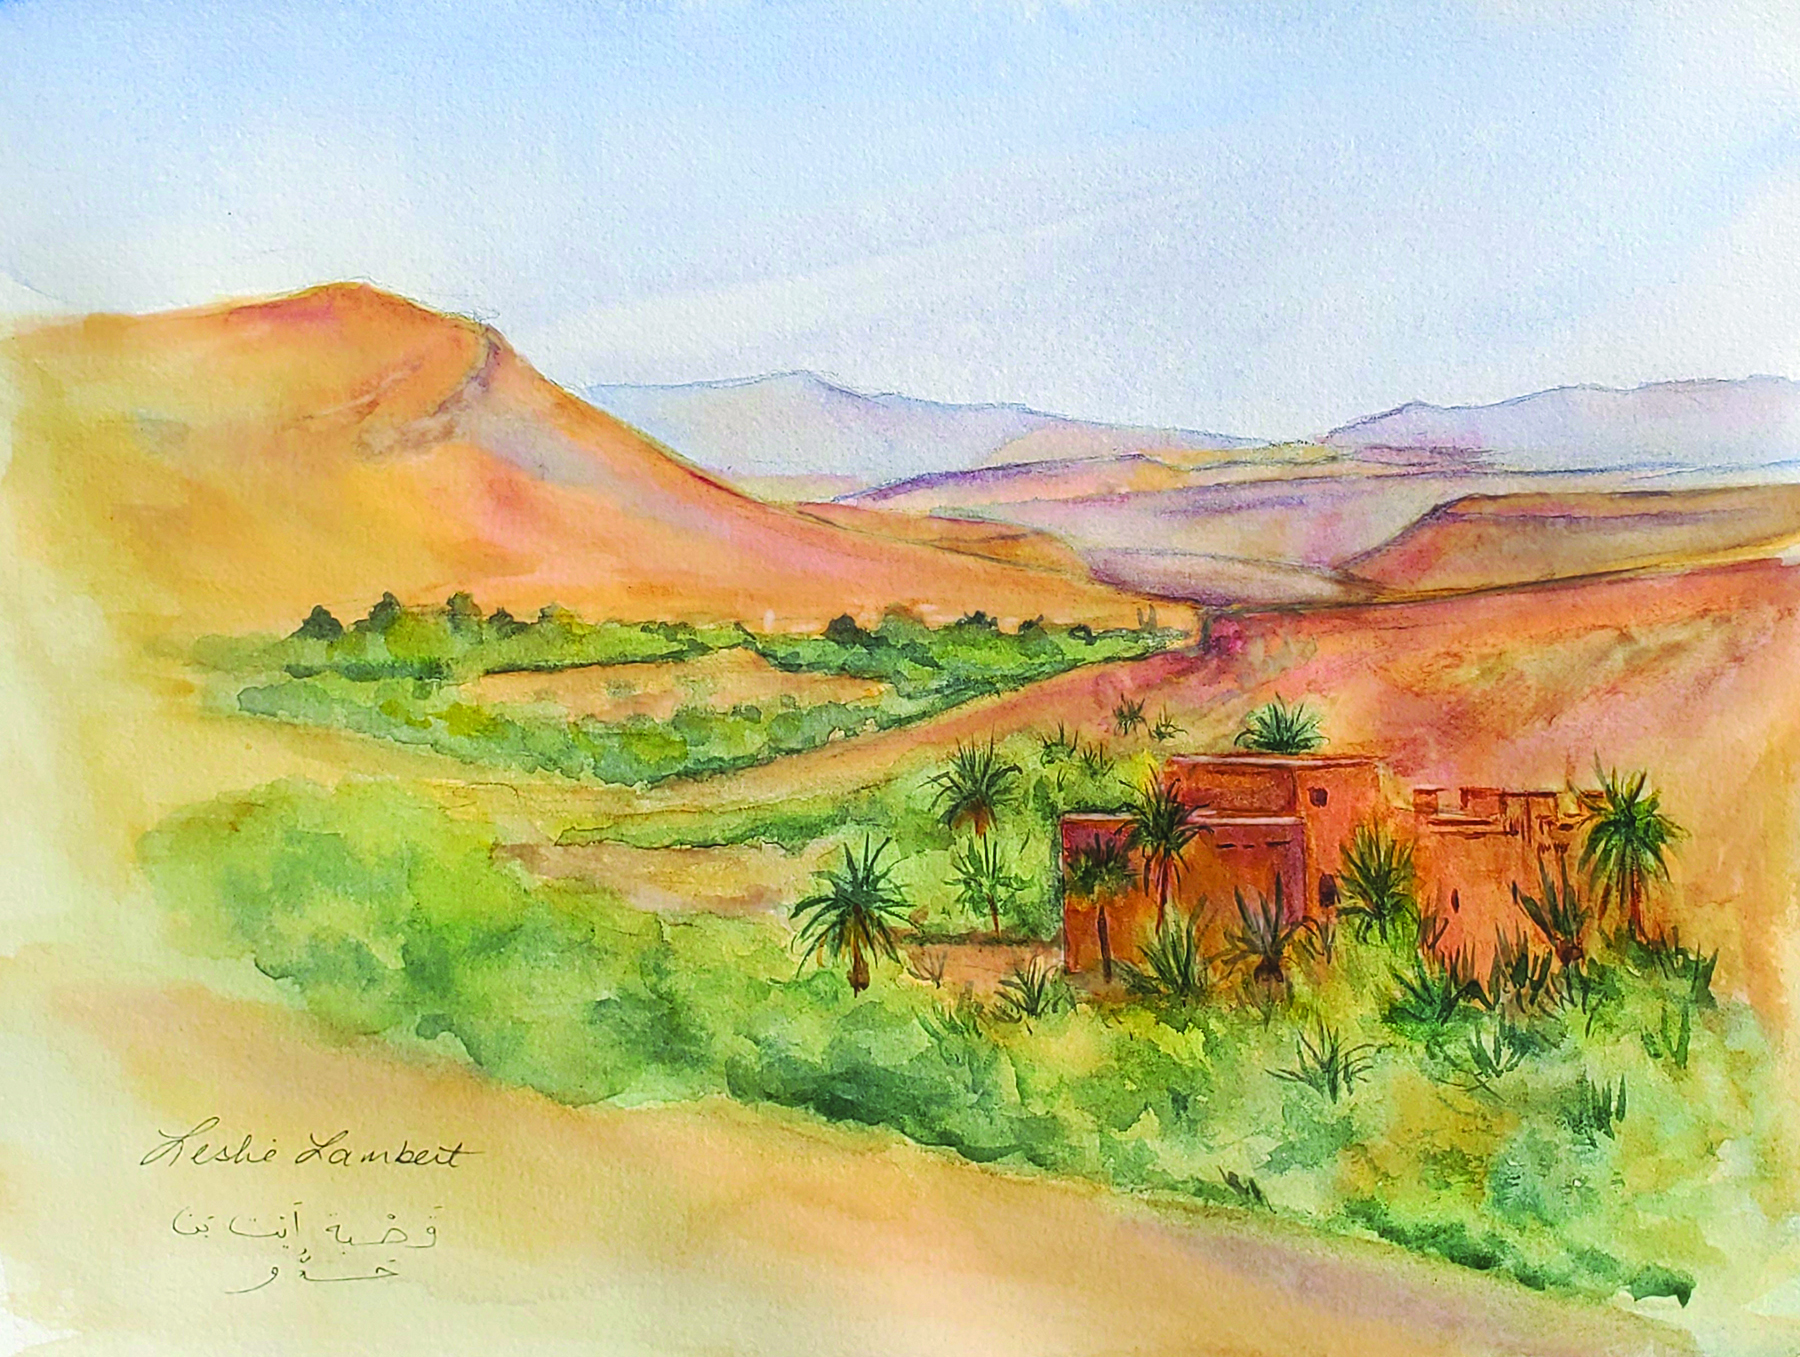 Leslie Lambert, “Valley of Ait-Ben-Haddou, Morocco,” 2022, watercolor, 11 x 14 in., Available from artist, Plein air